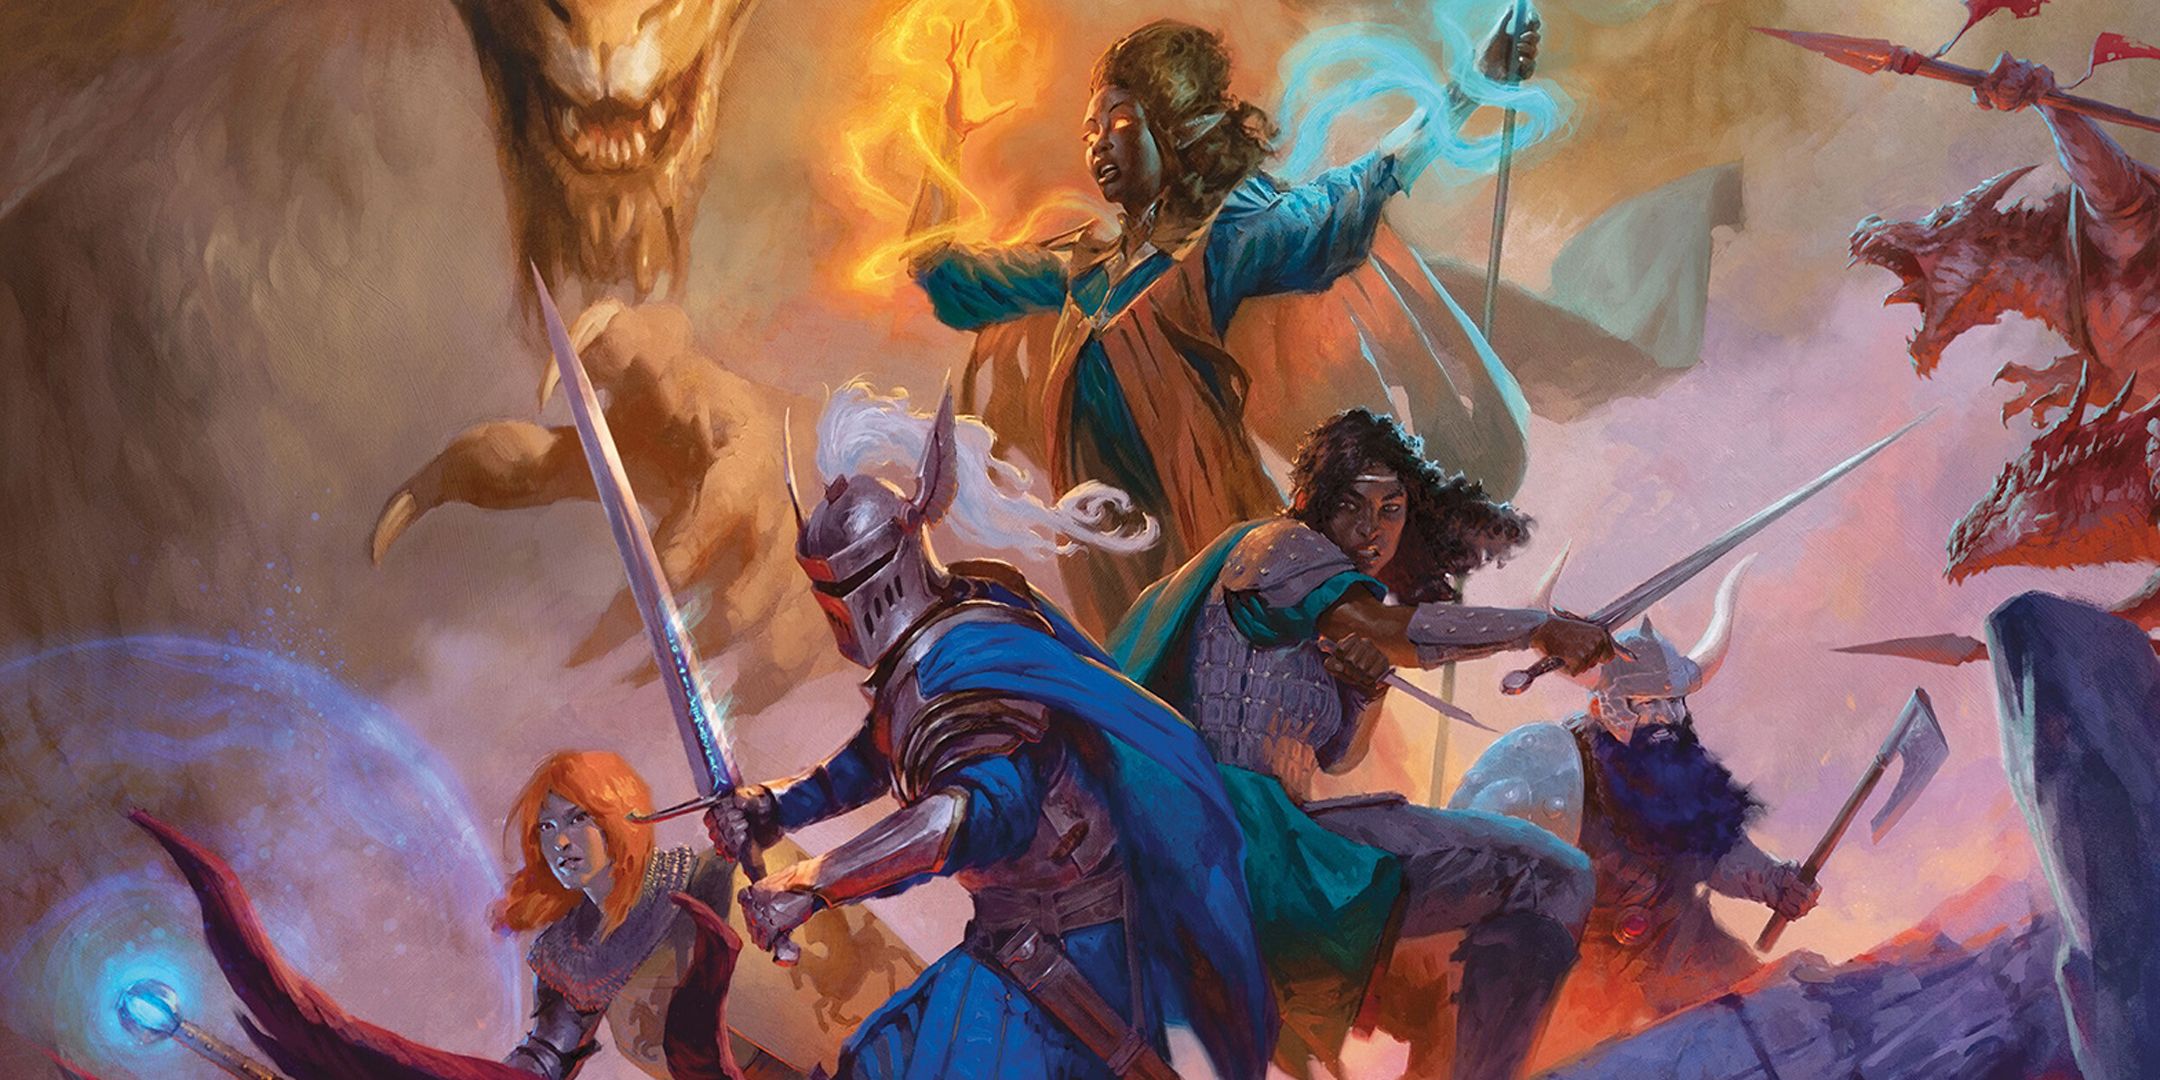 Cover art for the 2024 D&D Player's Handbook showing a party of adventurers with a dragon looming behind.